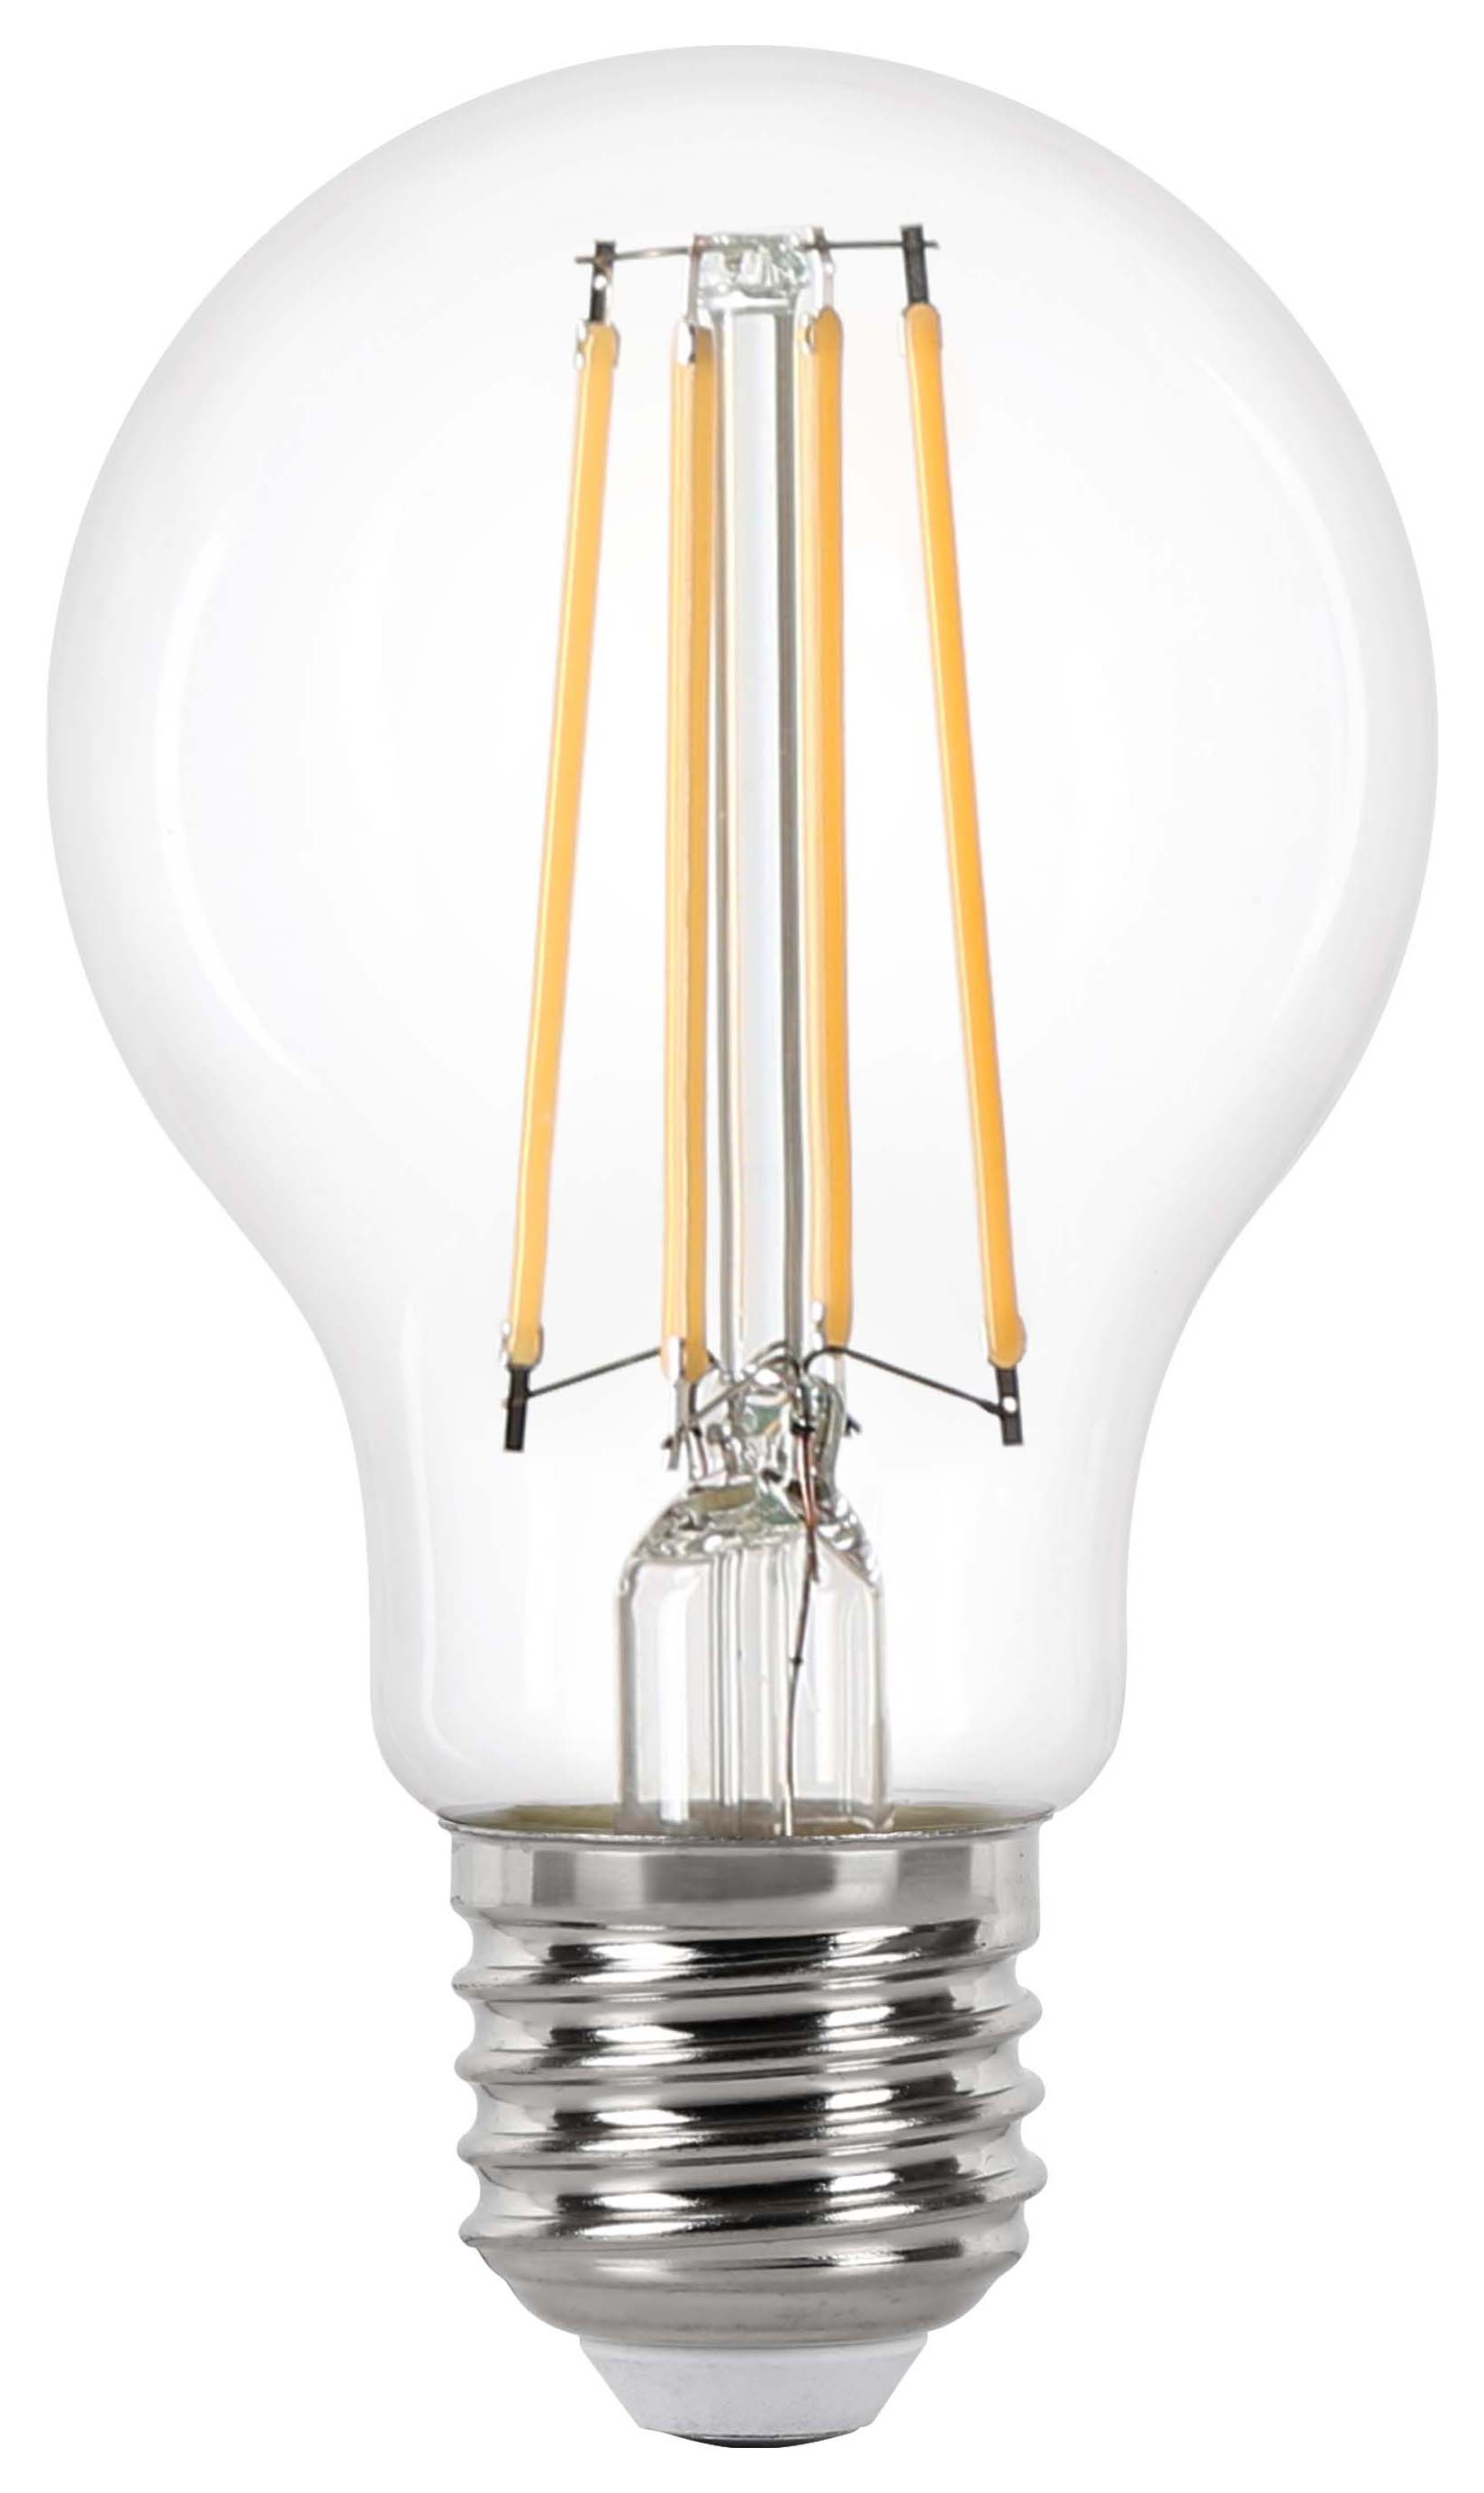 Image of Wickes Dimmable GLS Filament E27 5.9W Warm White Light Bulb